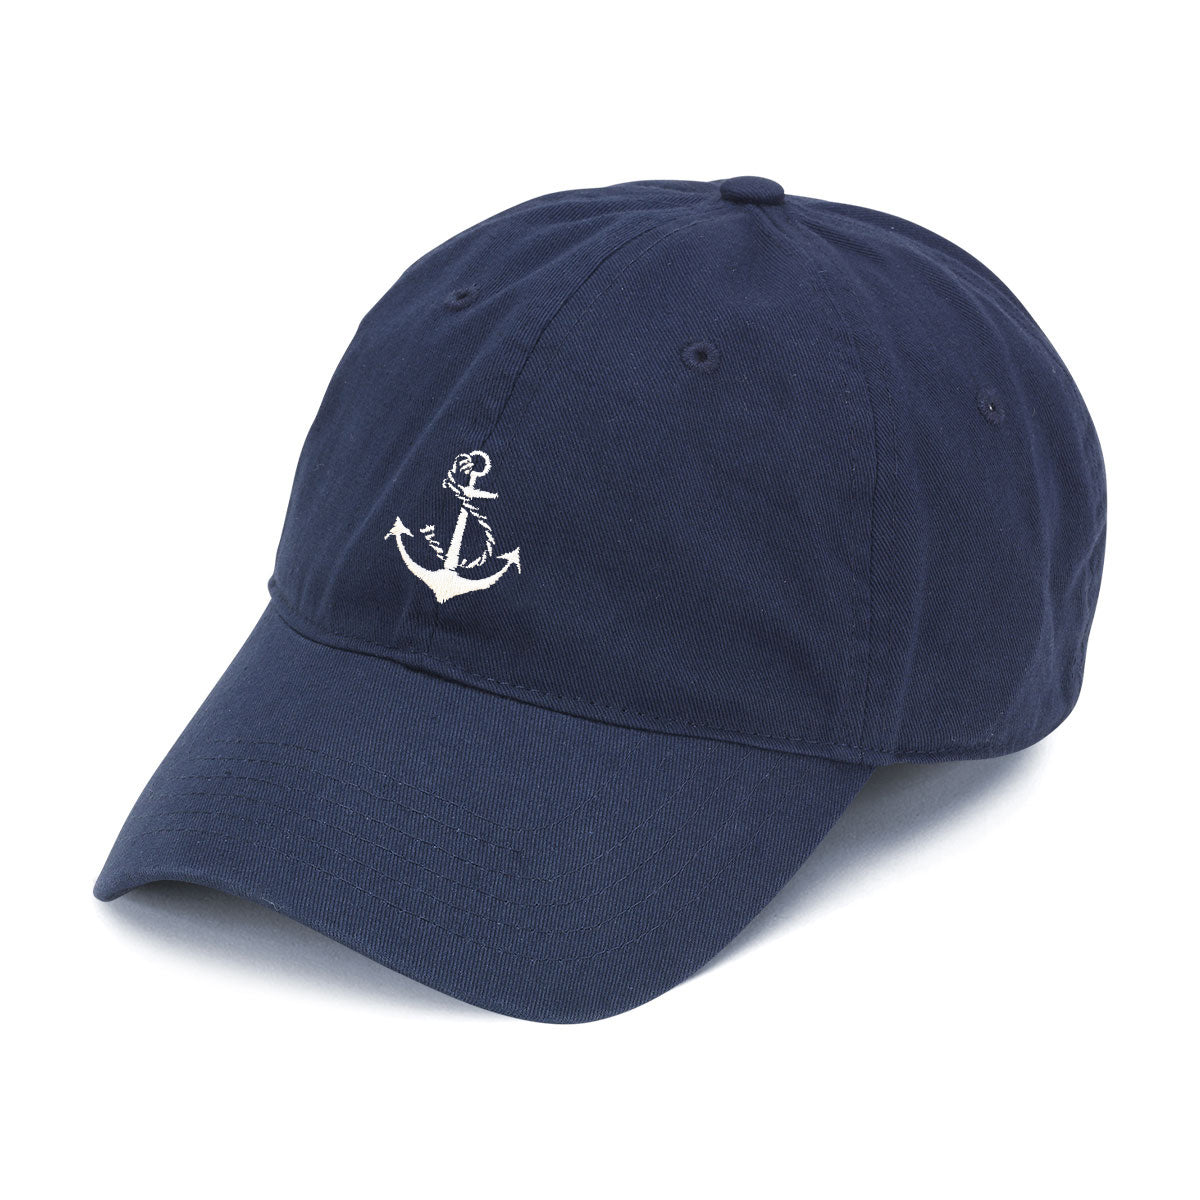 White Anchor Embroidered Navy Cap